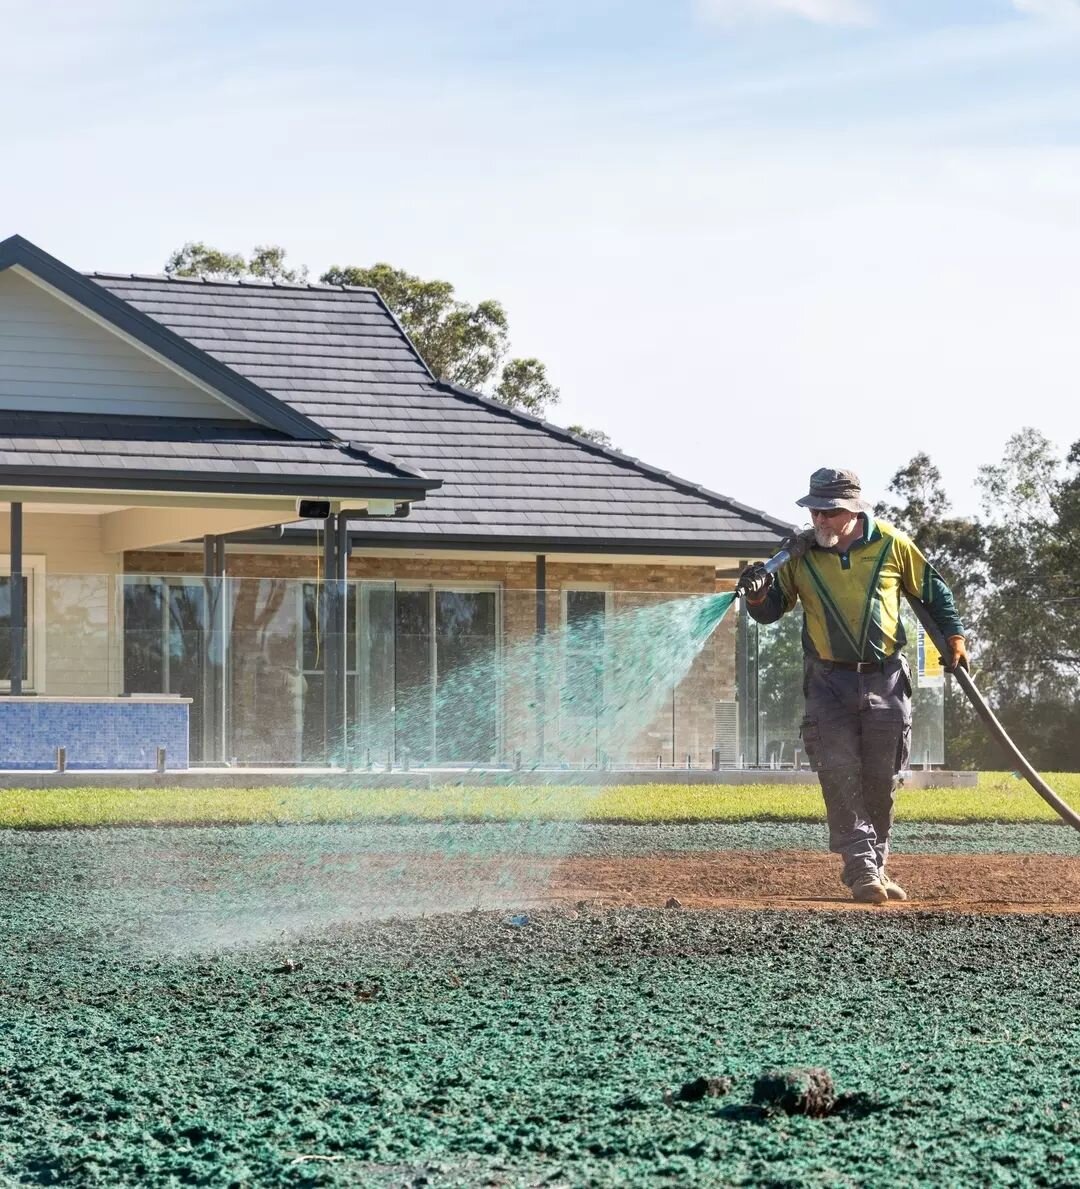 Exciting news! 🌱 🌿 The hydroseeding process has begun at the Brownlow Hill Project. Stay tuned for lush greenery and a transformed landscape!

#Hydroseeding #BrownlowHill #Techscapes #Landscaper #SydneyLandscaper #LandscapeDesign #GardenTips #Grass